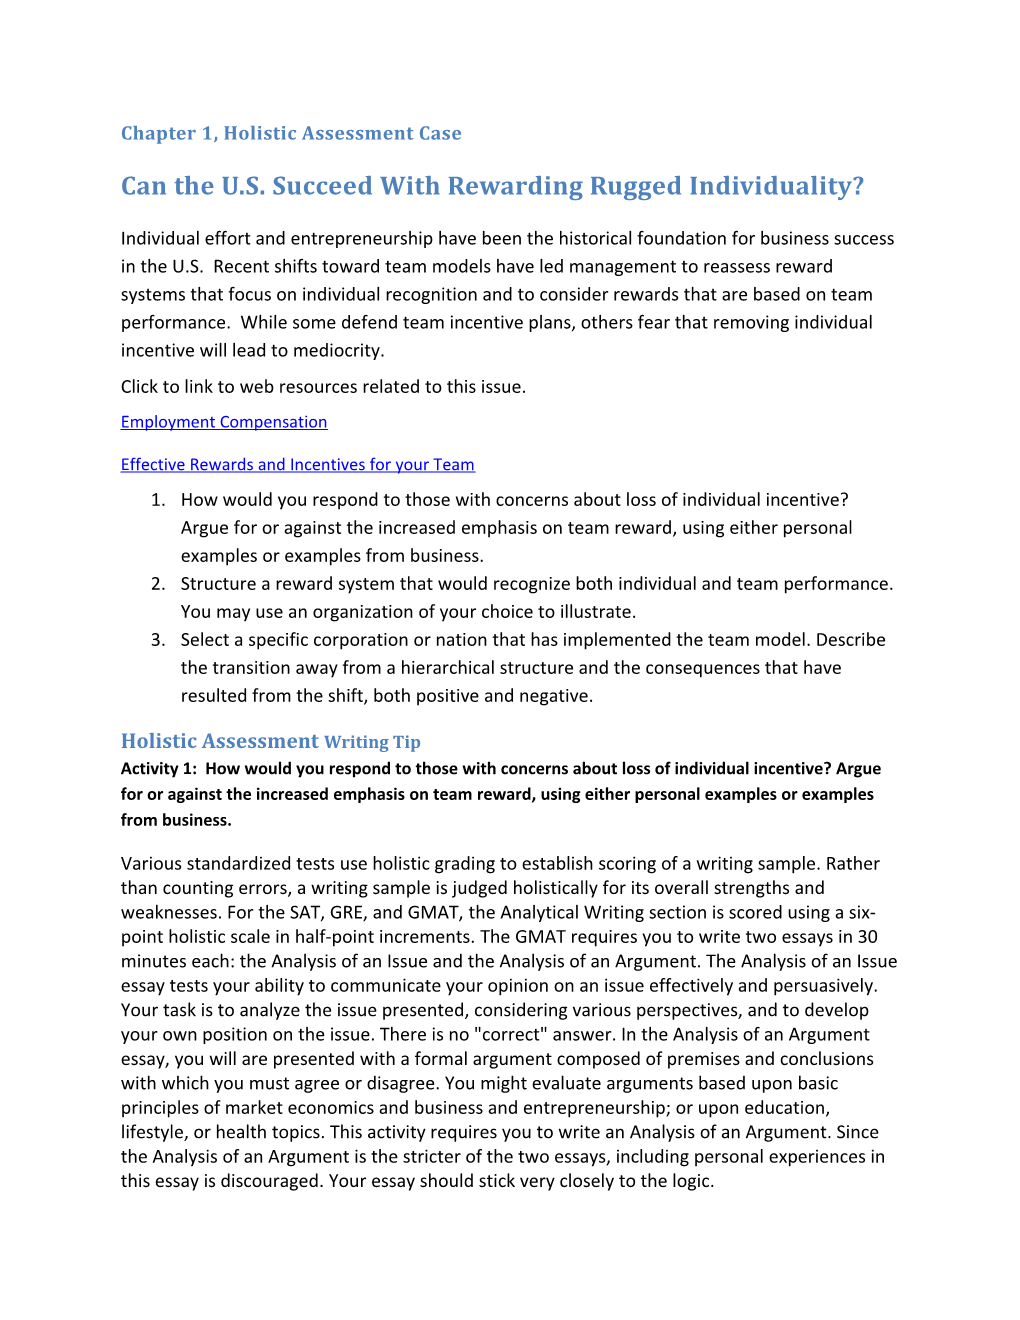 Can the U.S. Succeed with Rewarding Rugged Individuality?